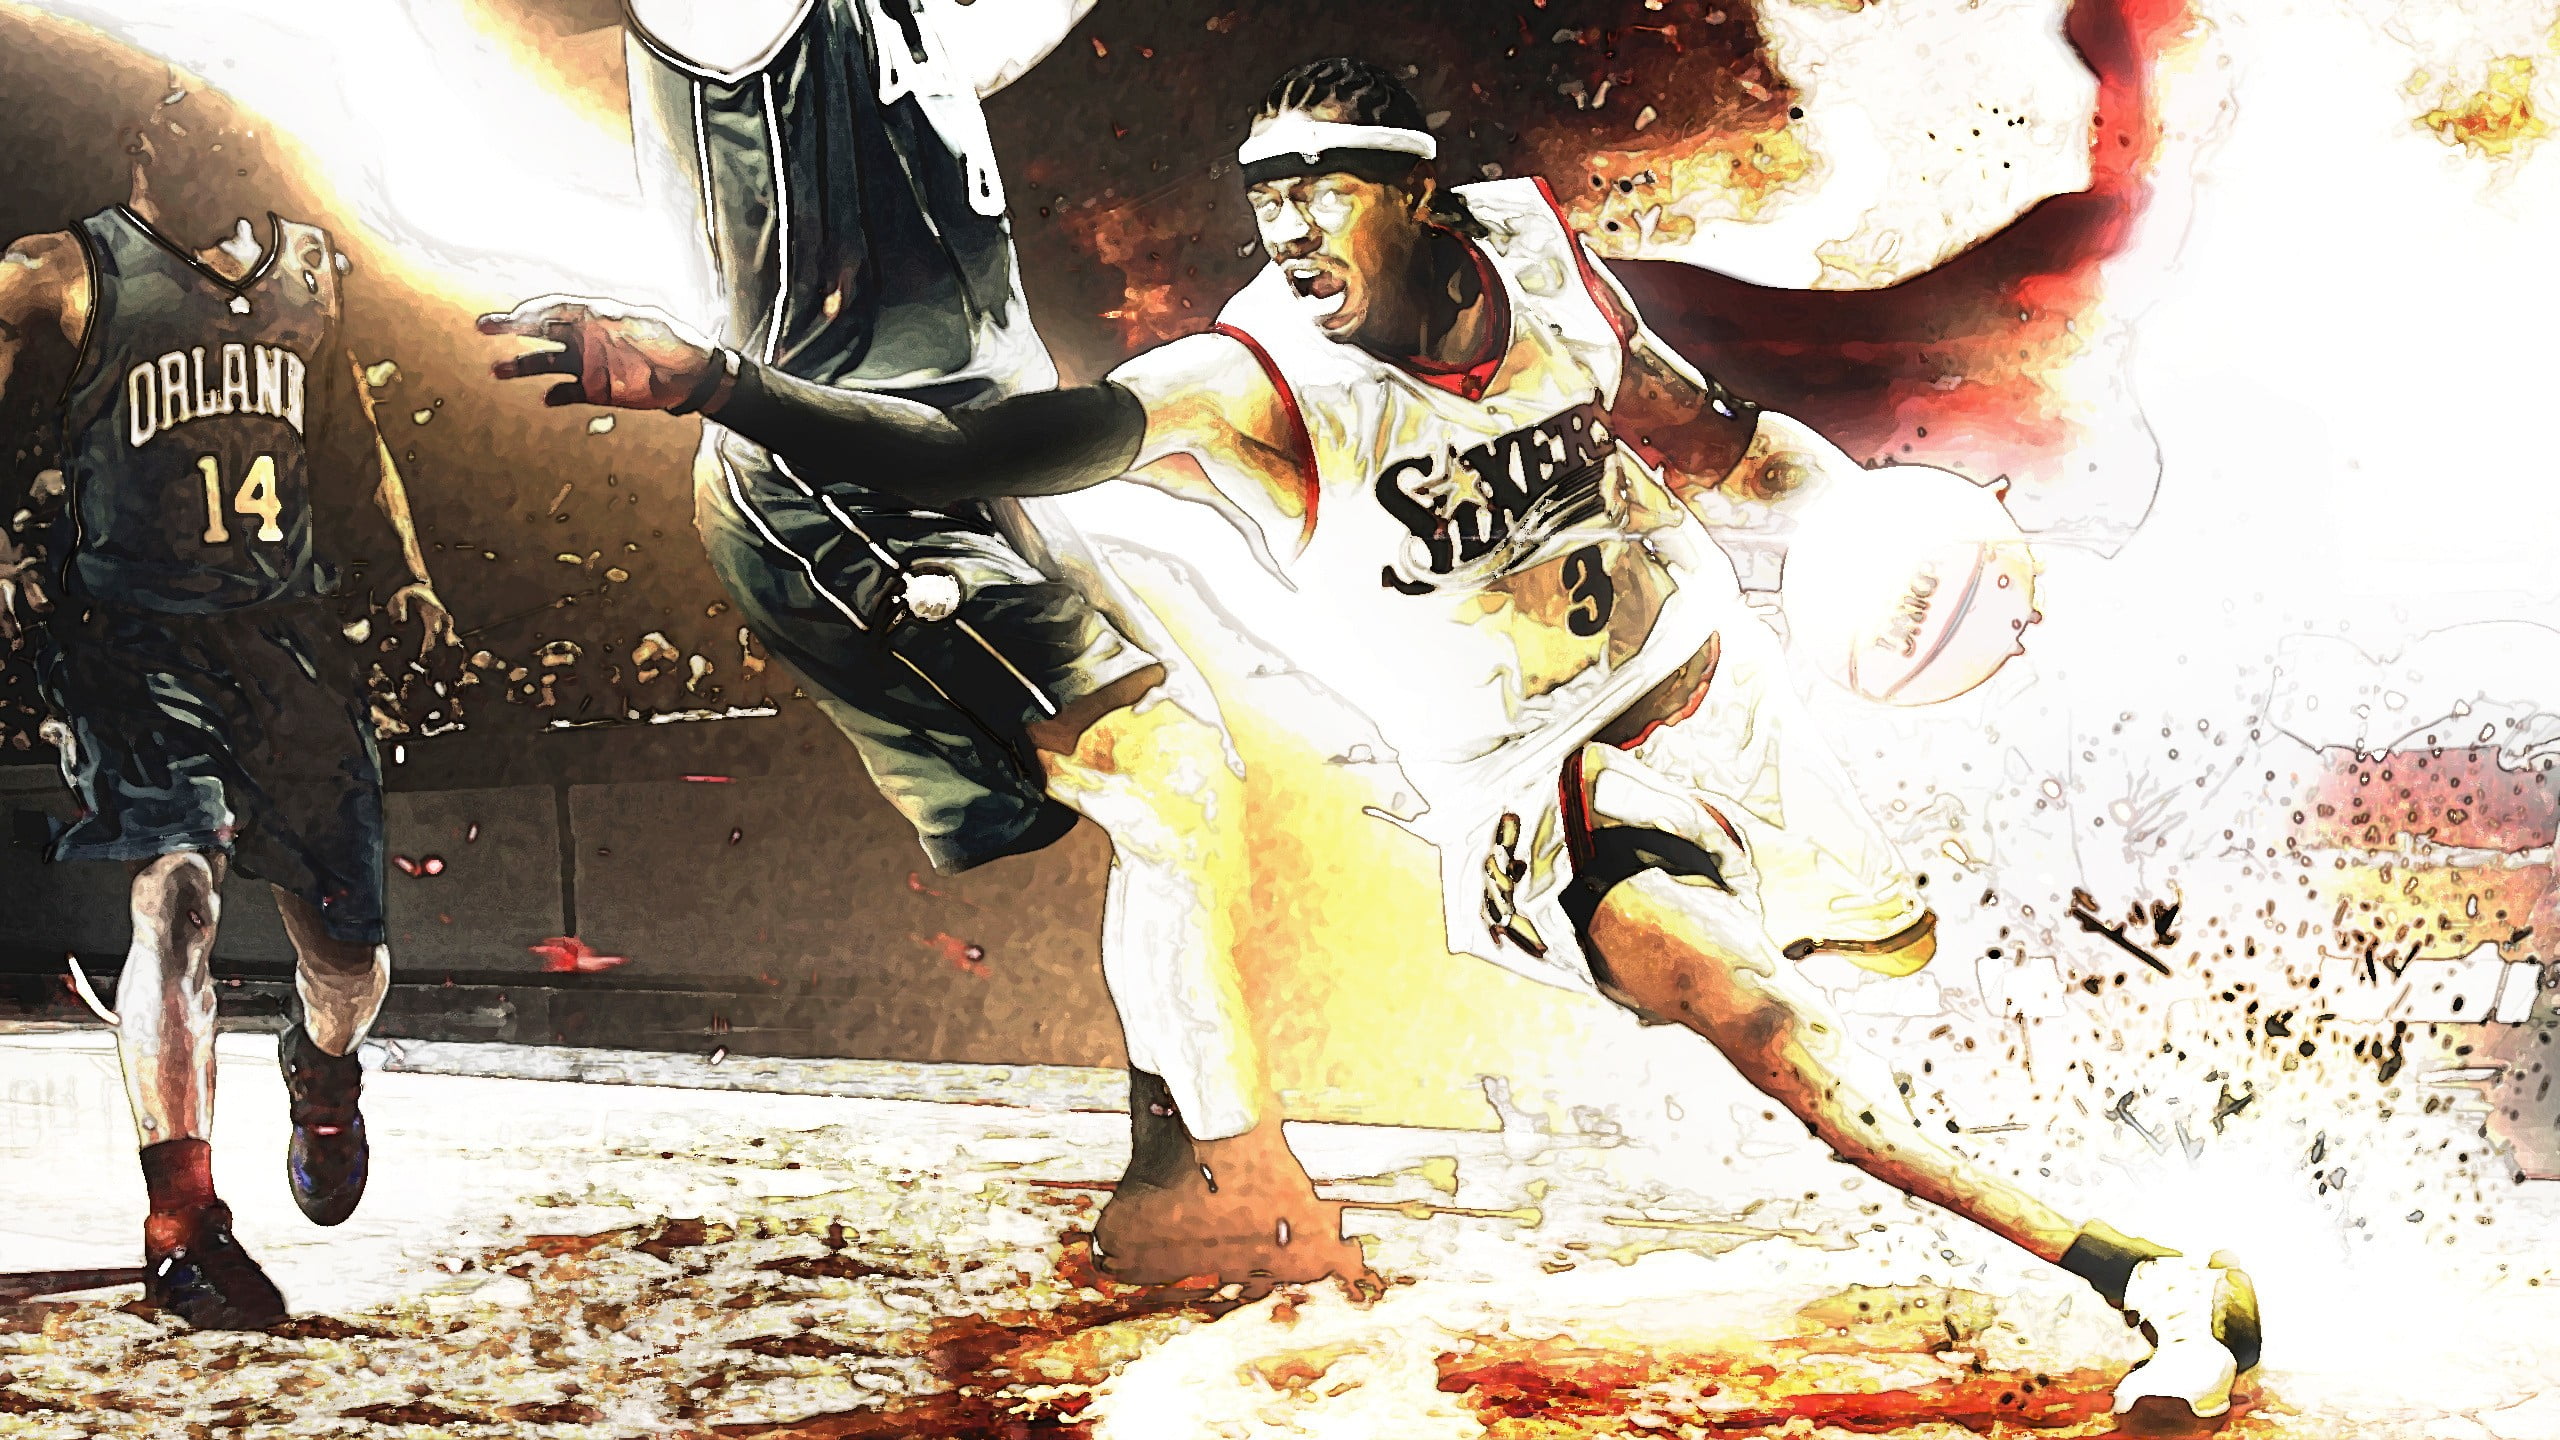 Allen Iverson wallpaper, basketball, NBA, real people, city, lifestyles